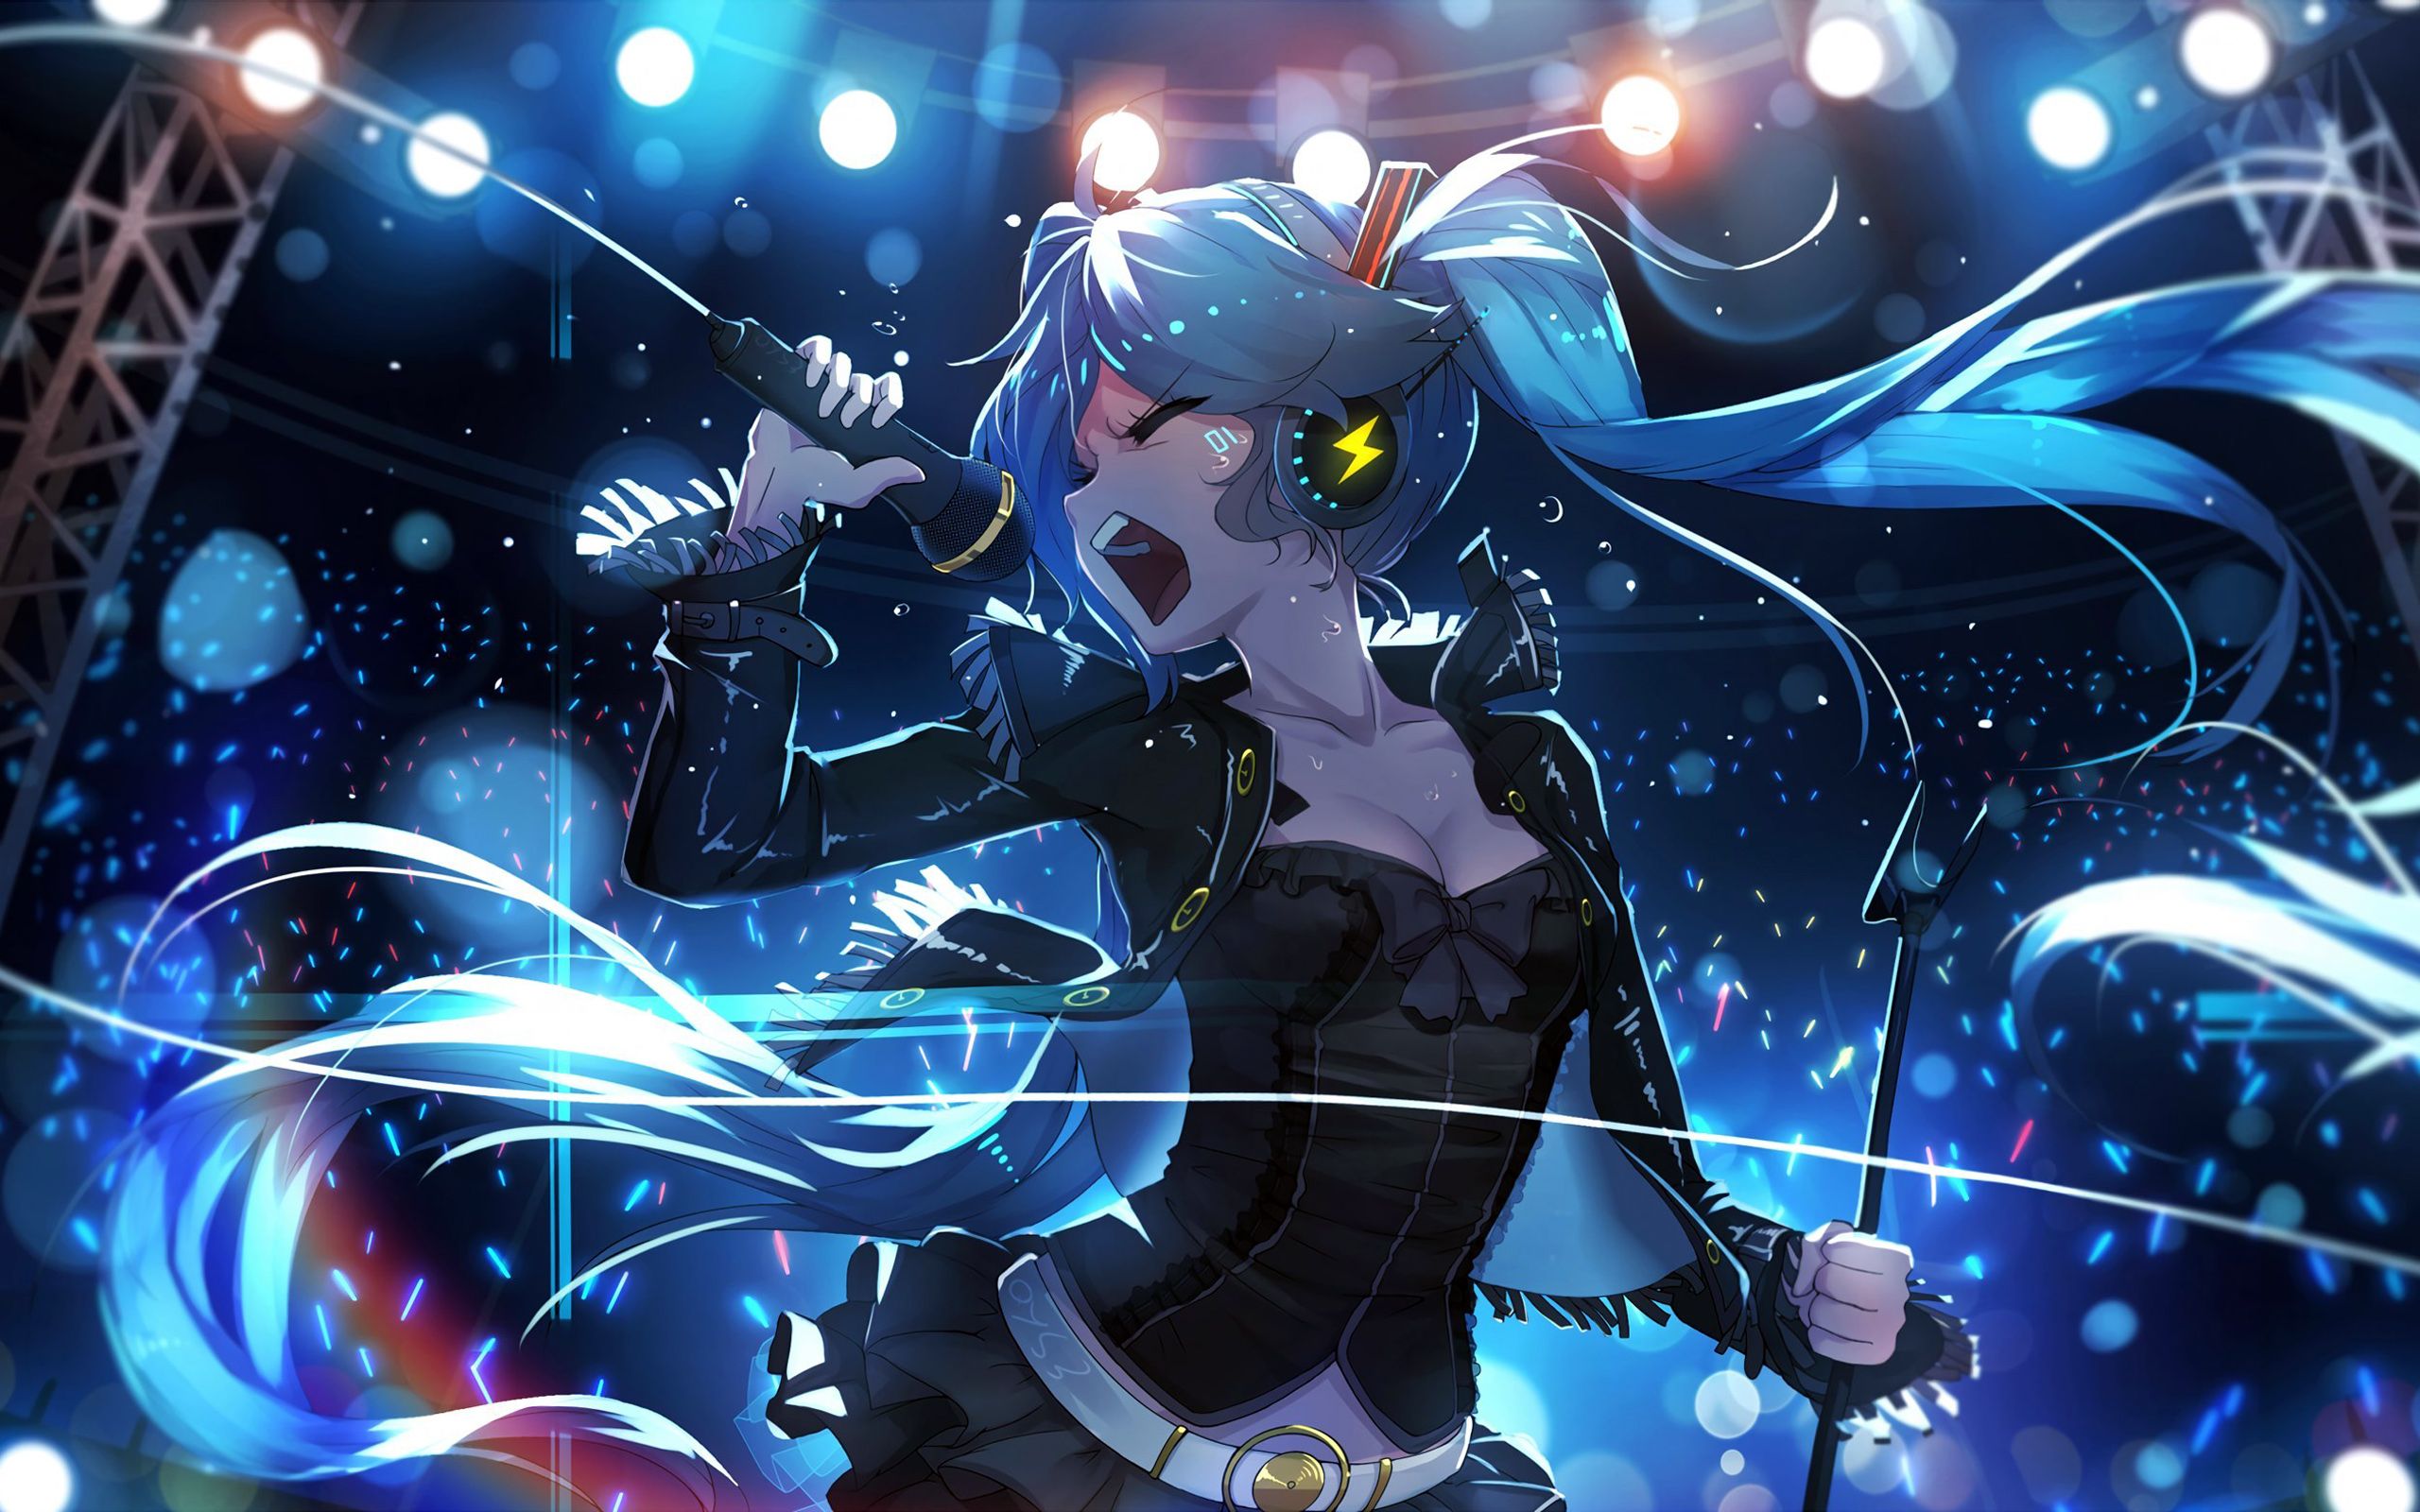 Concert Anime Wallpapers - Wallpaper Cave